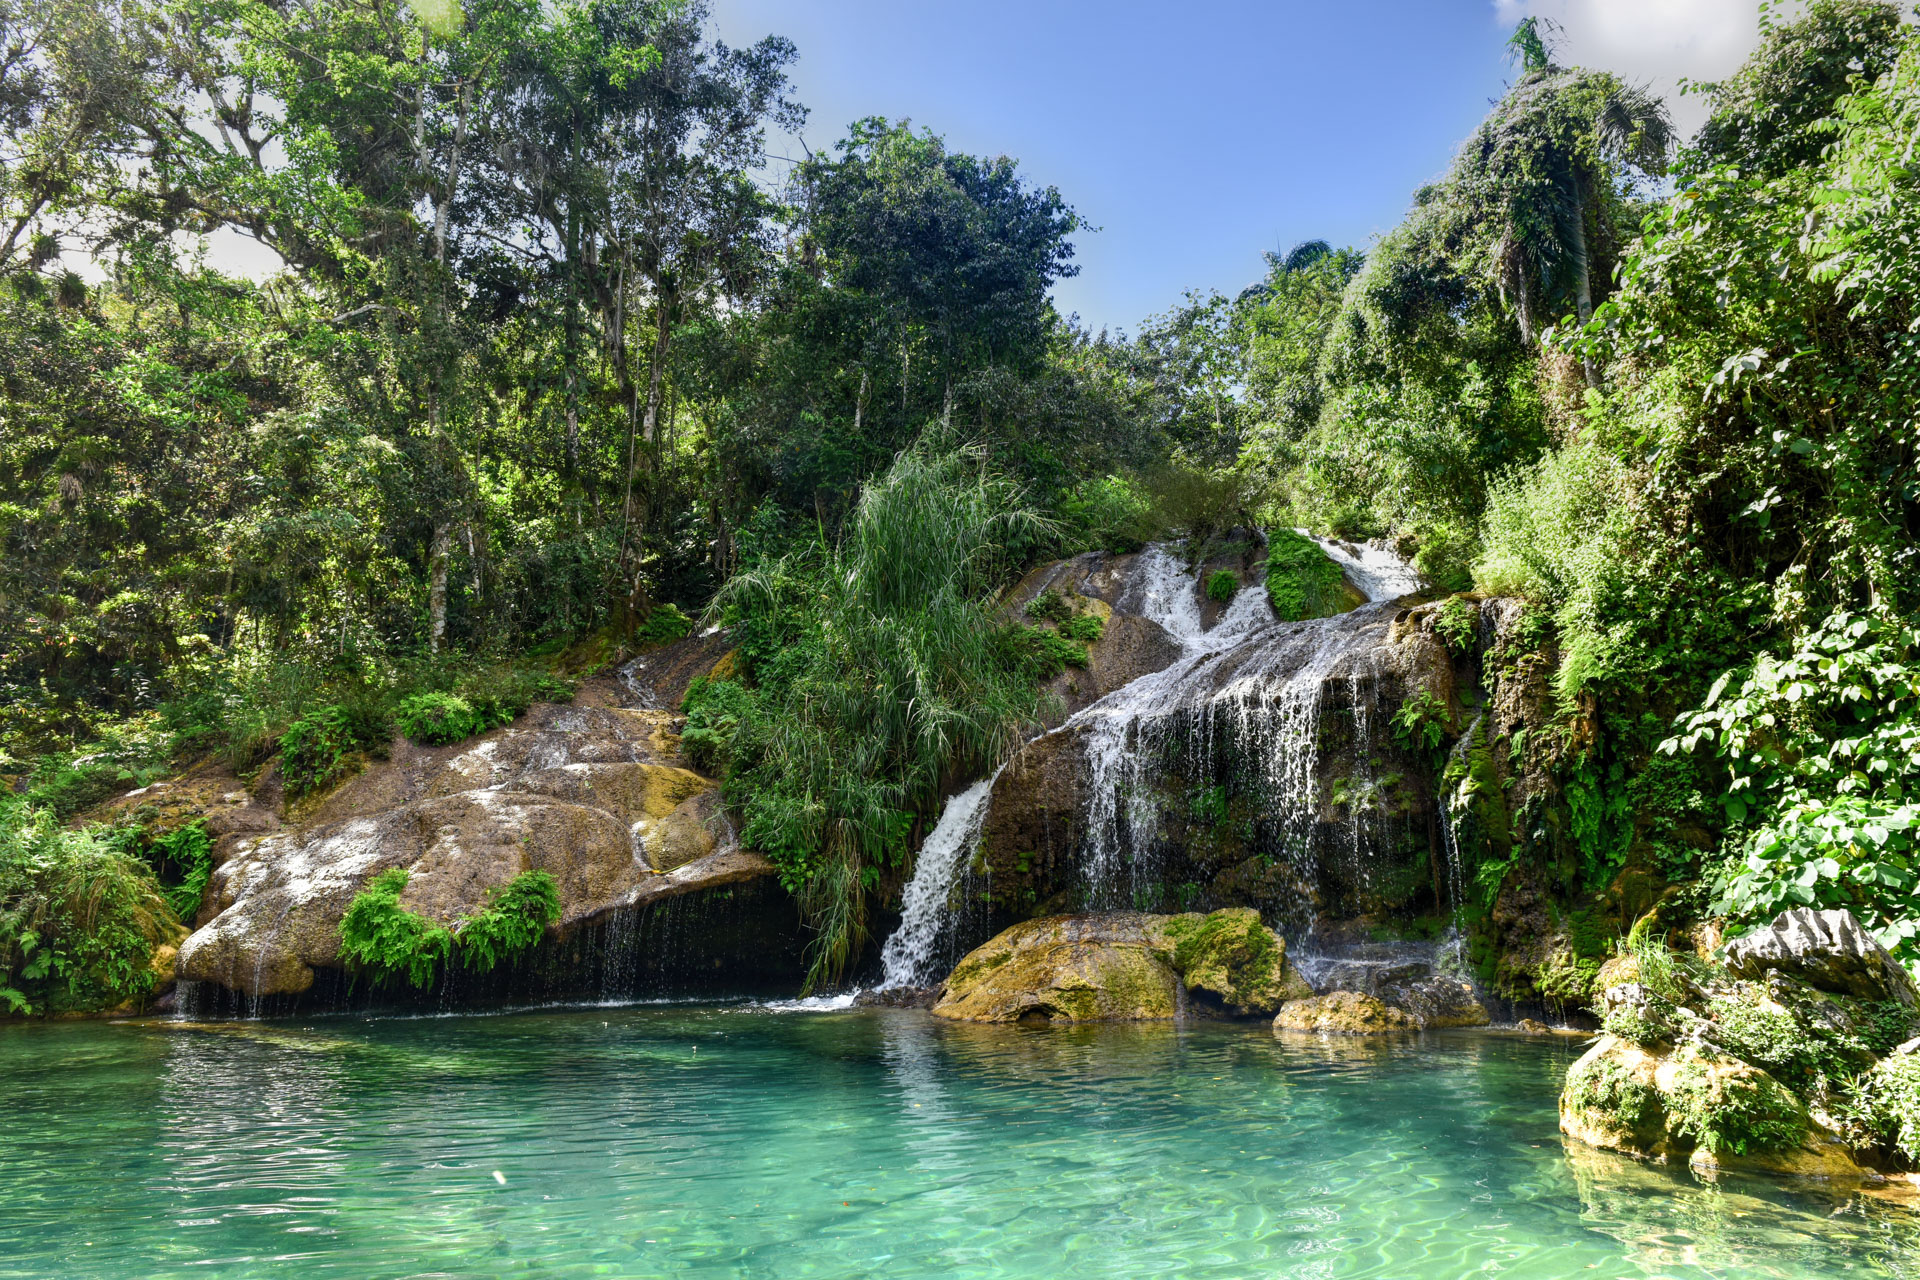 El Nicho Waterfalls in Cuba. El Nicho is located inside the Gran Parque Natural Topes de Collantes, a forested park that extends across the Sierra Escambray mountain range in central Cuba.